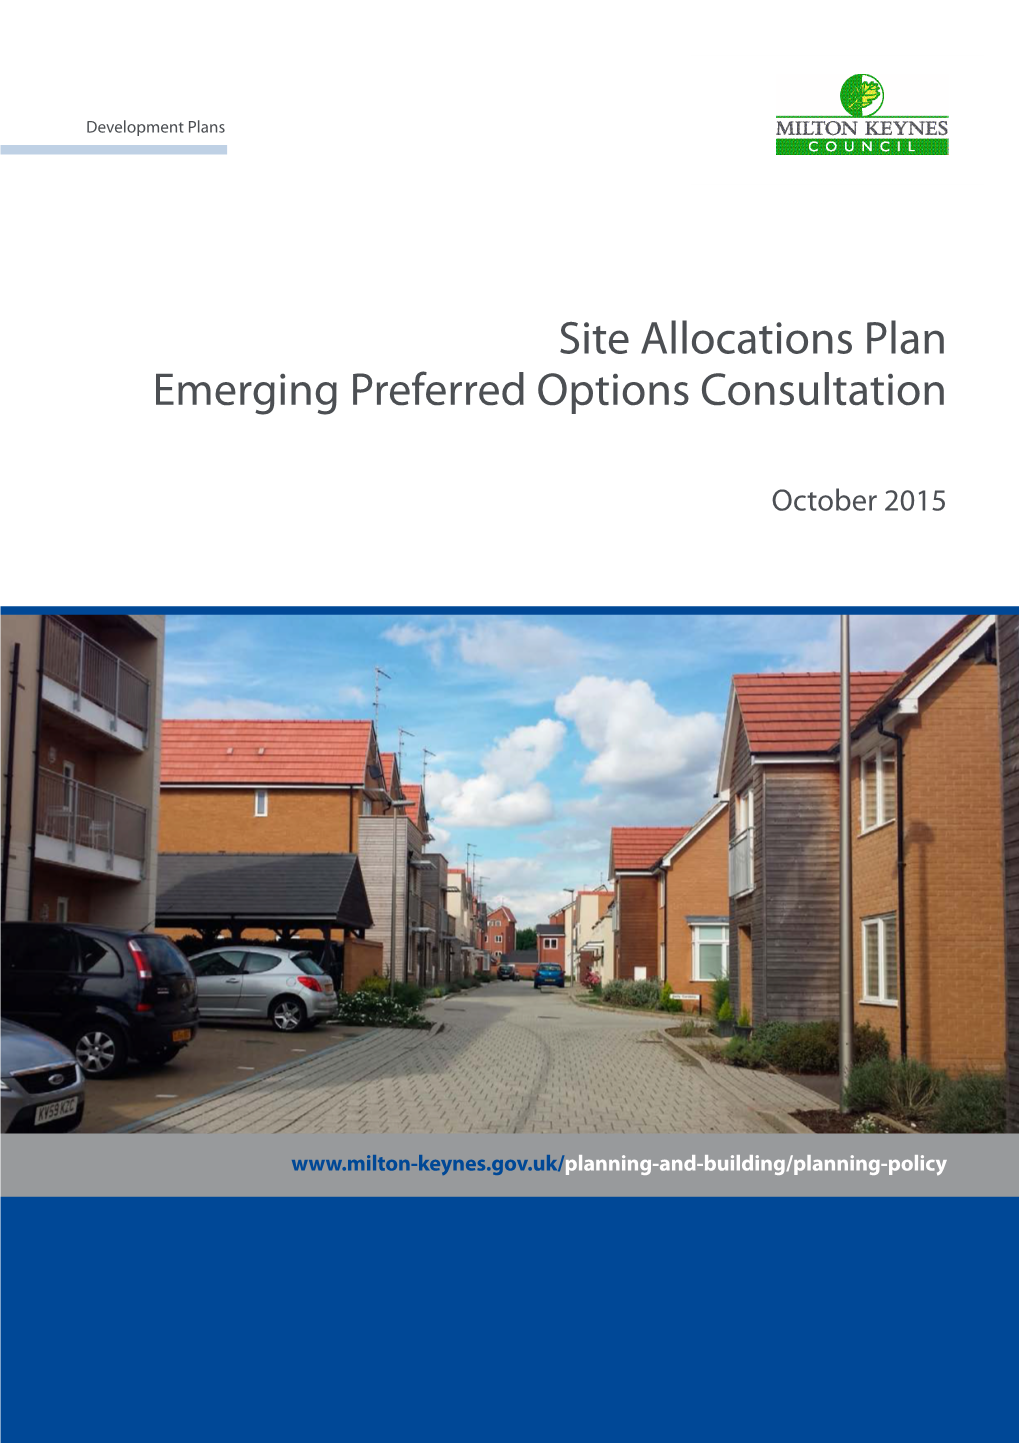 Site Allocations Plan: Emerging Preferred Options, October 2015